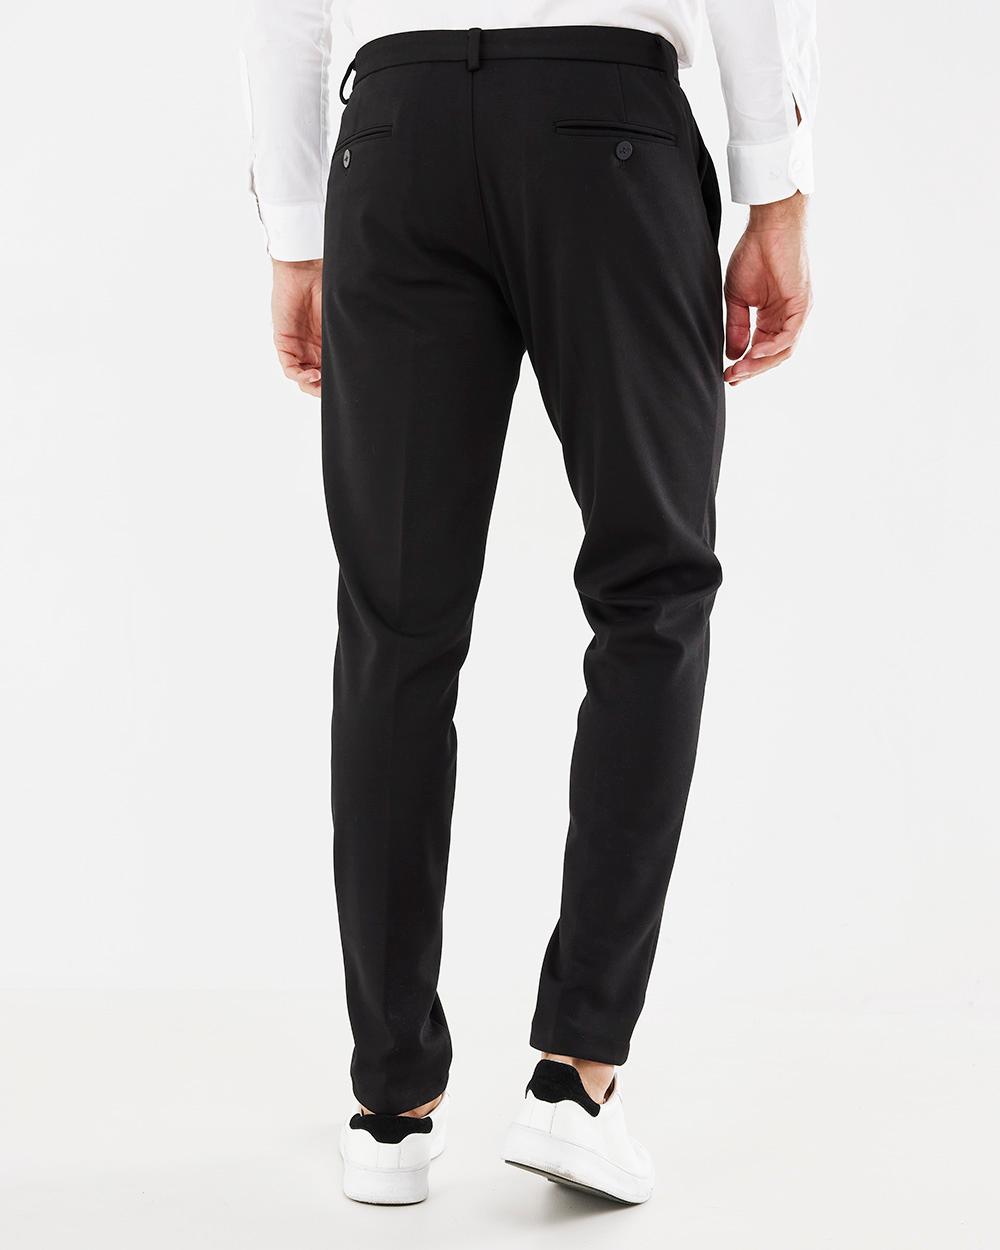 Selected image for MEXX Muške pantalone crne